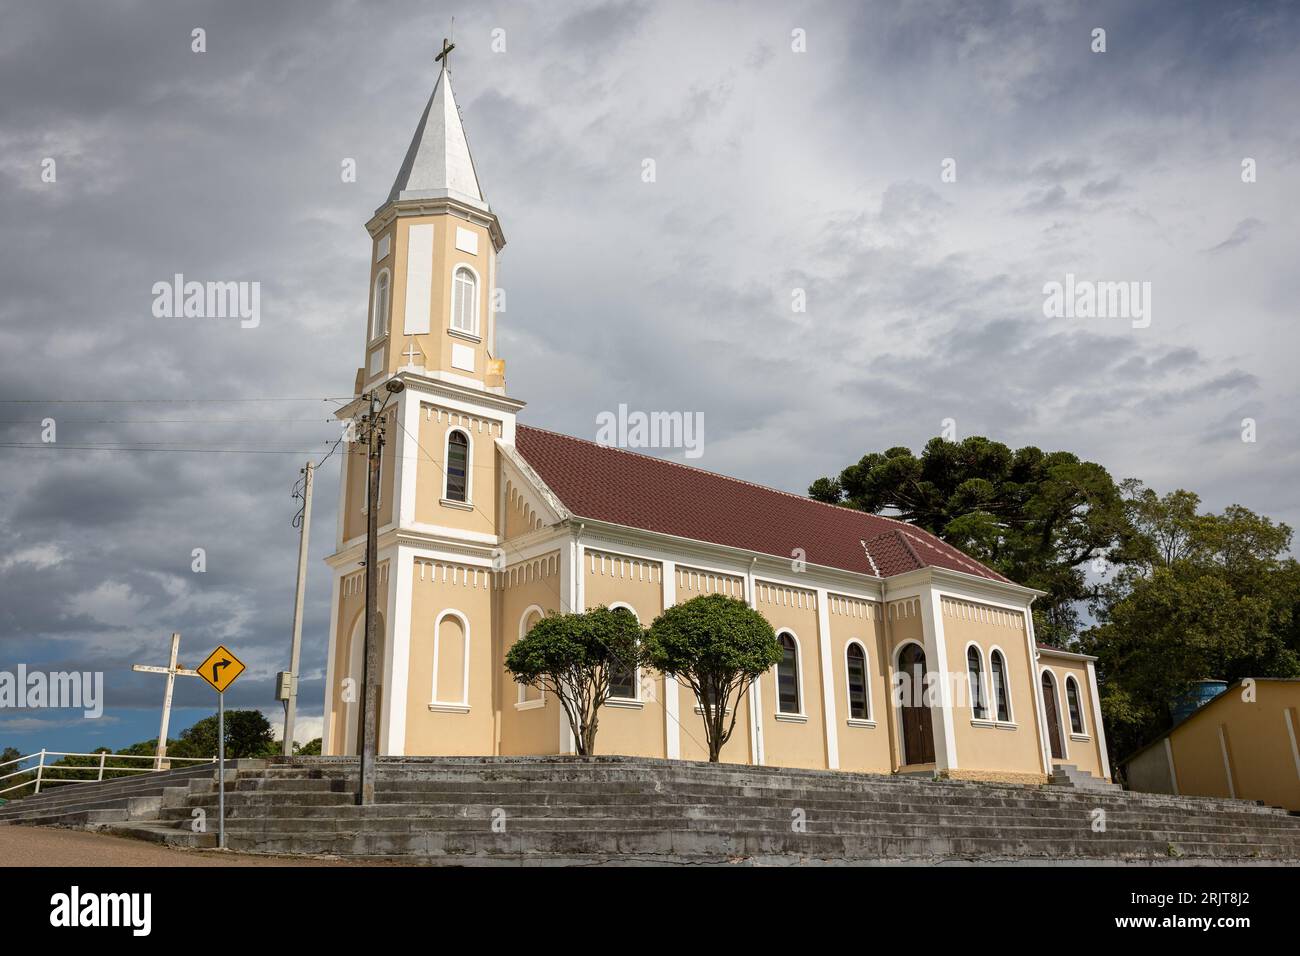 A white church with an impressive arched steeple and a tall tower Stock Photo